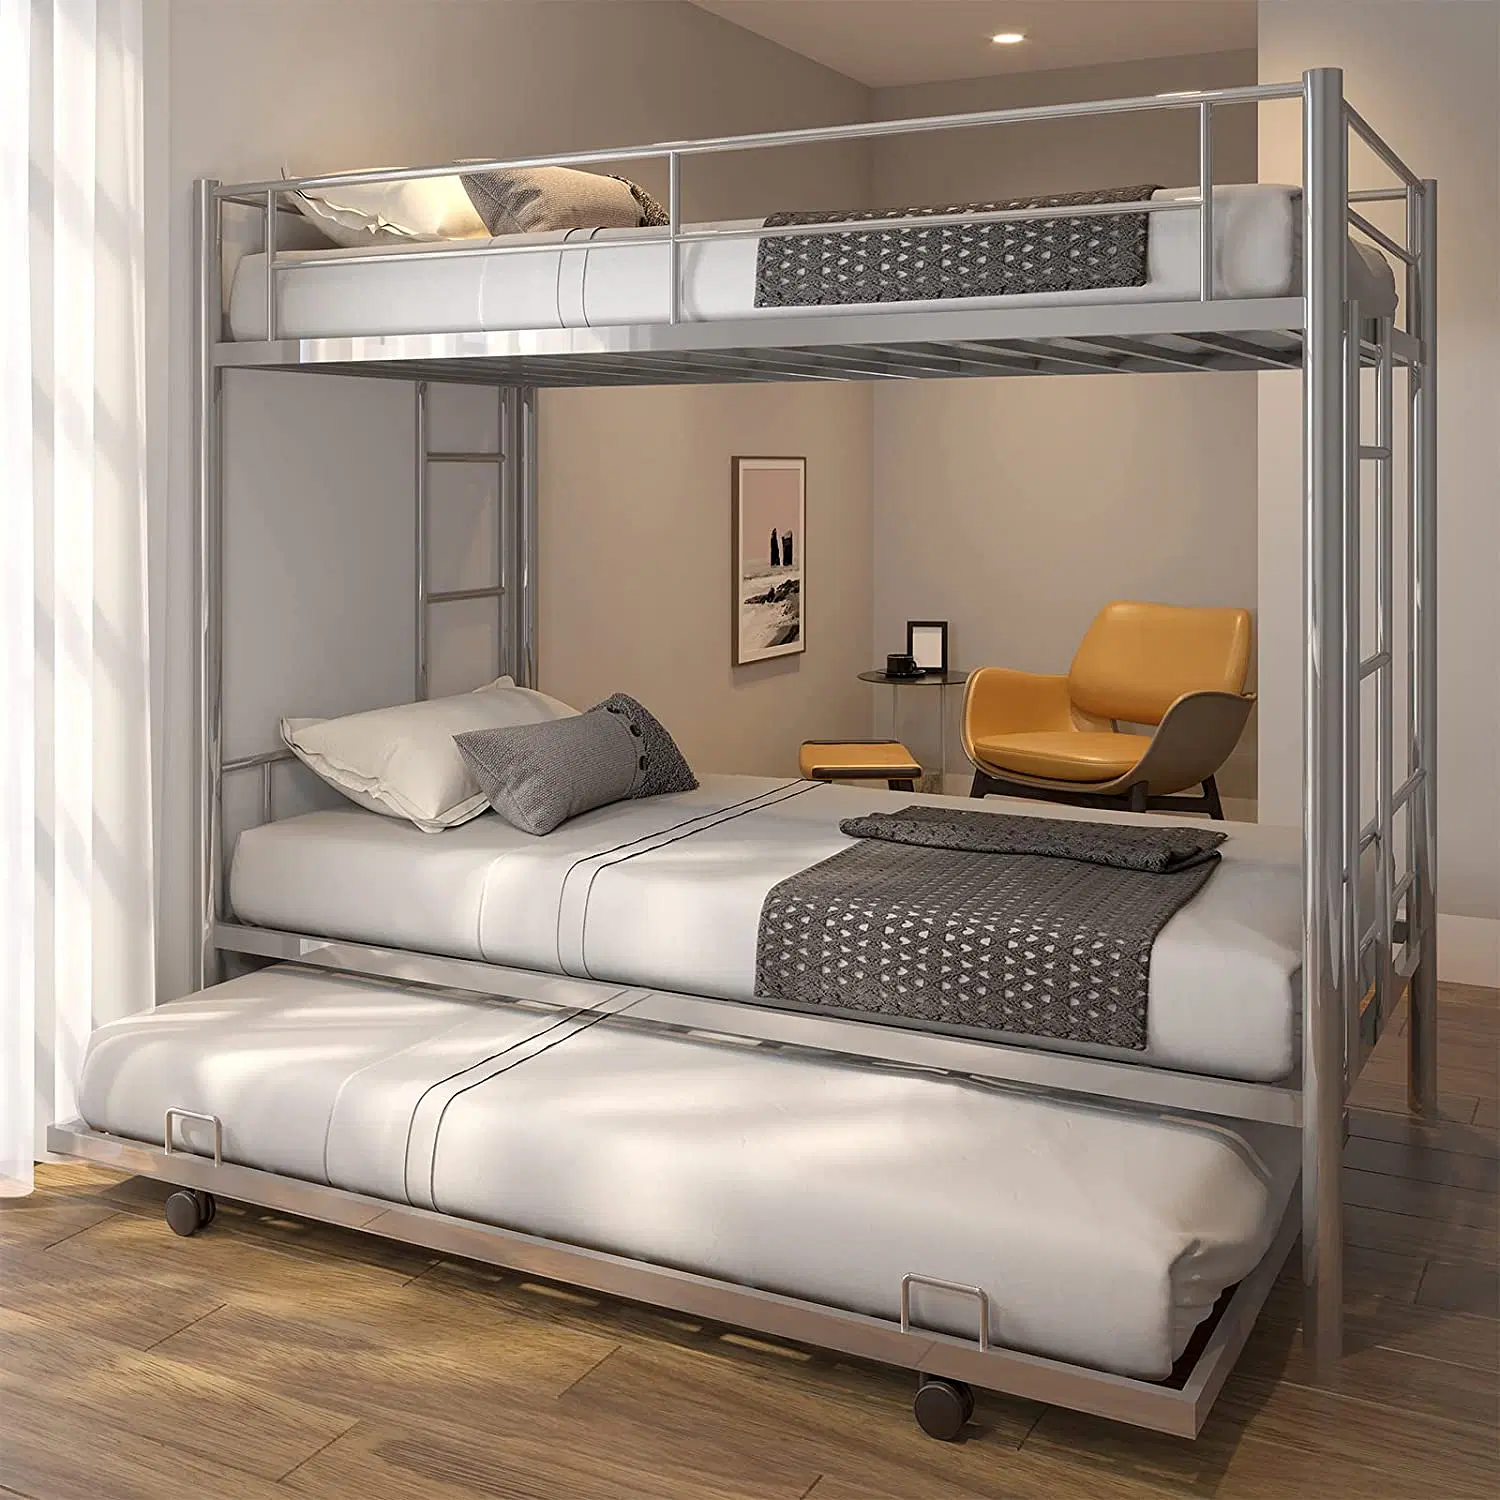 Key Factors to Consider Before Purchasing a Bunk Bed